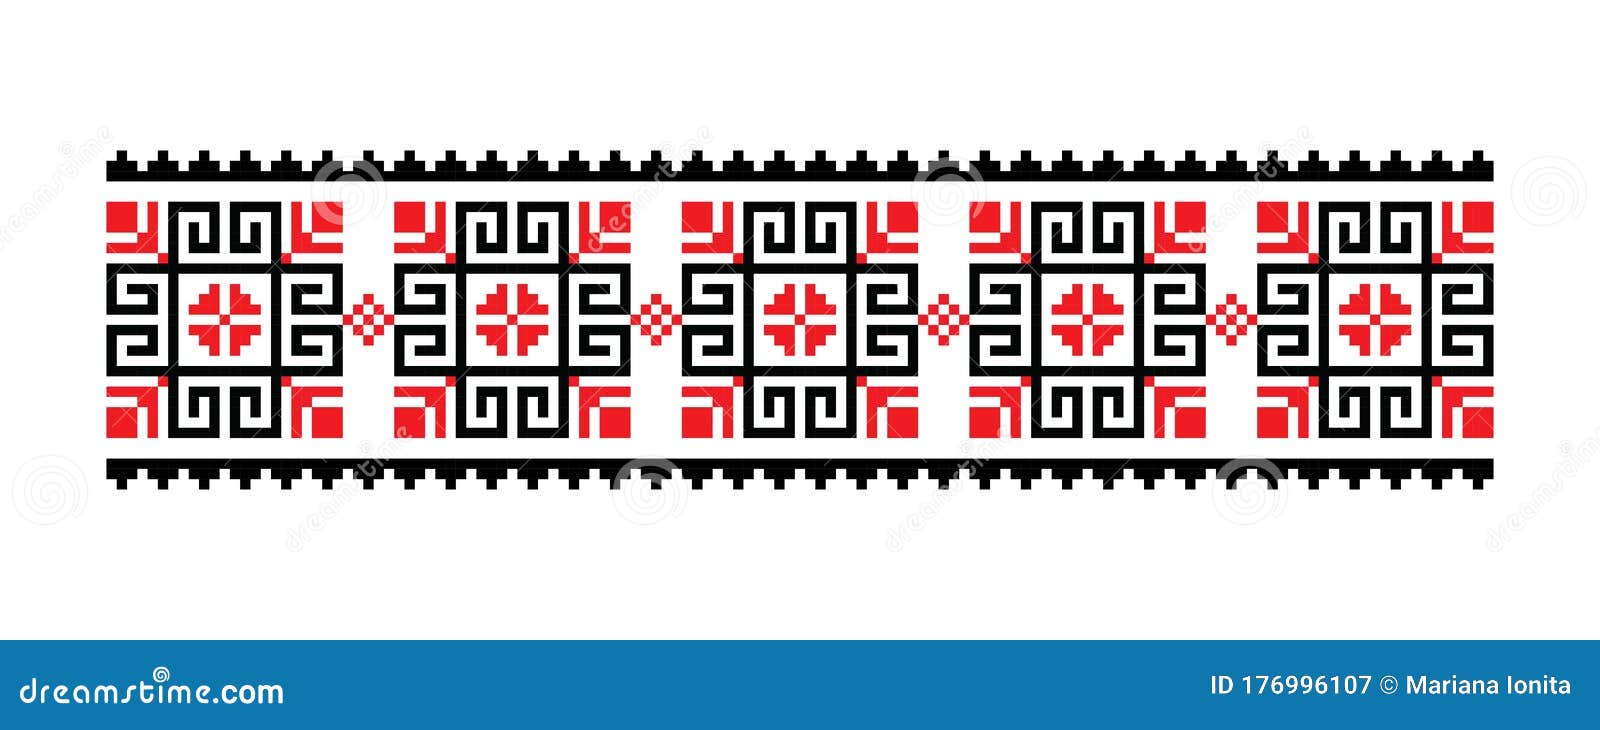 tradional embrodery motif - seamless border